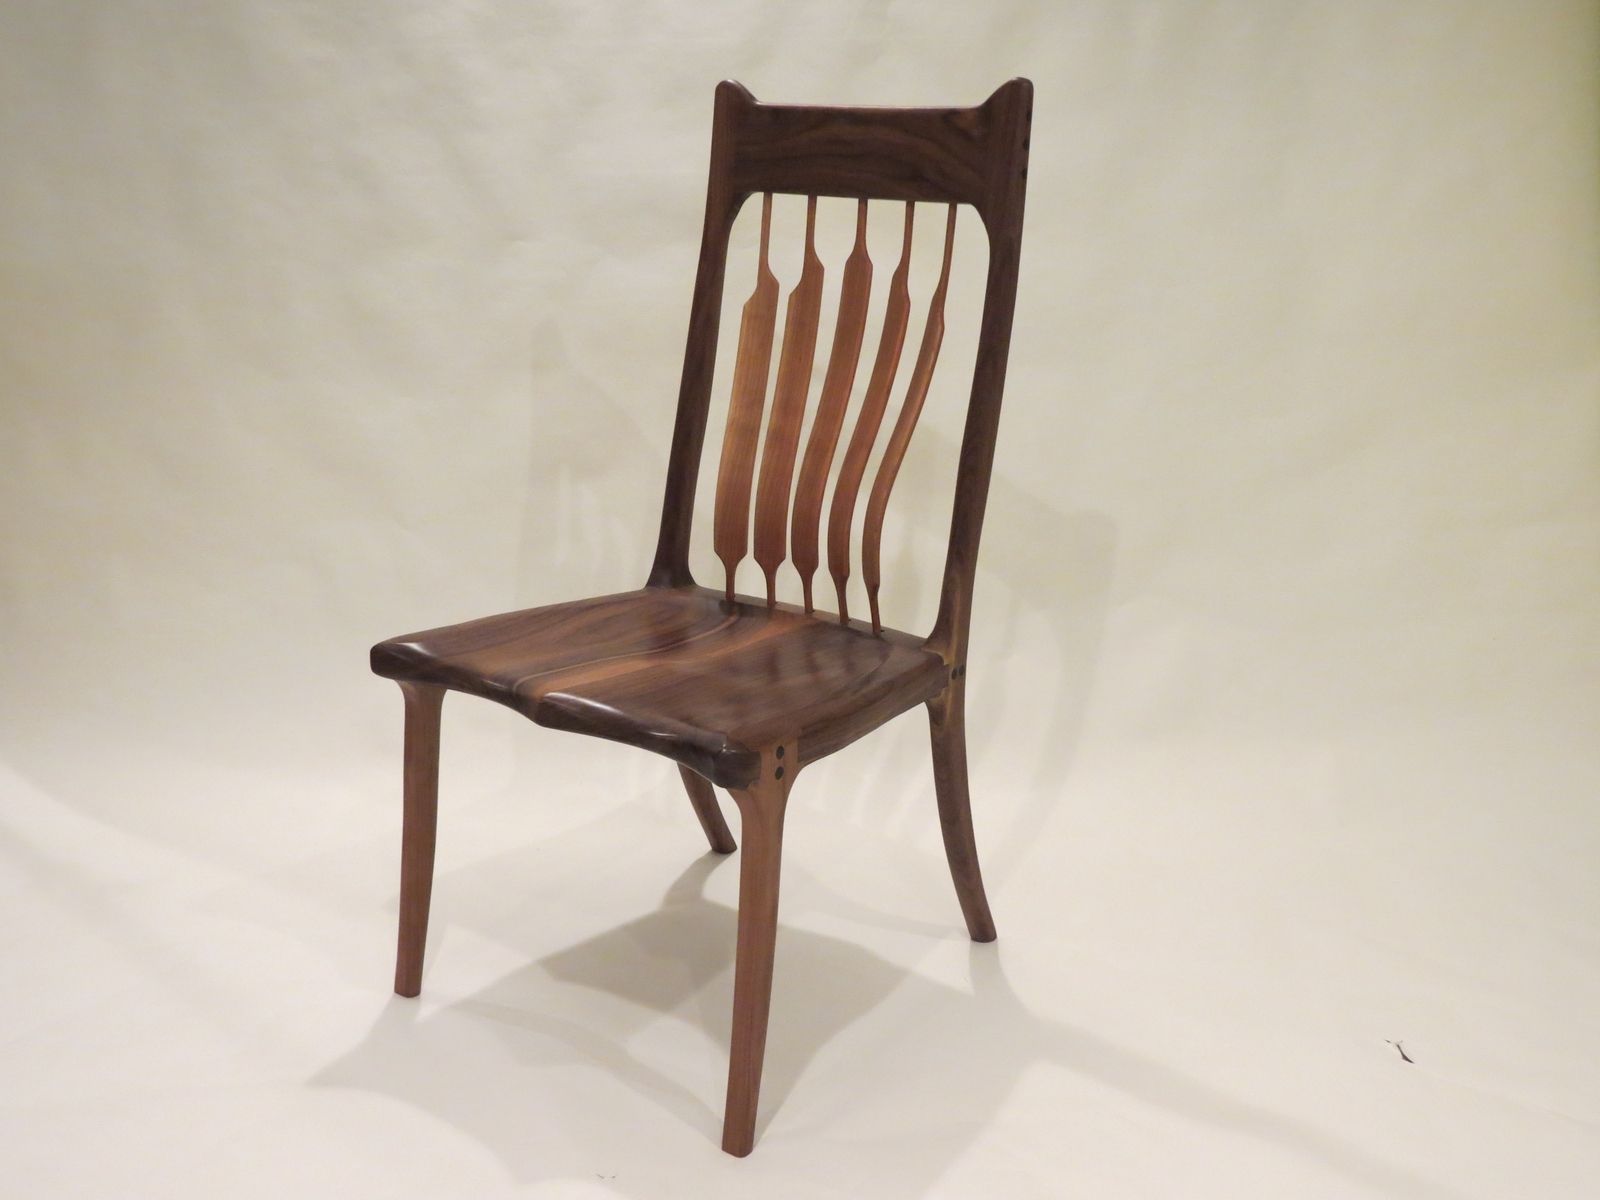 Buy Custom High Back Dining Chair, made to order from Lost Creek